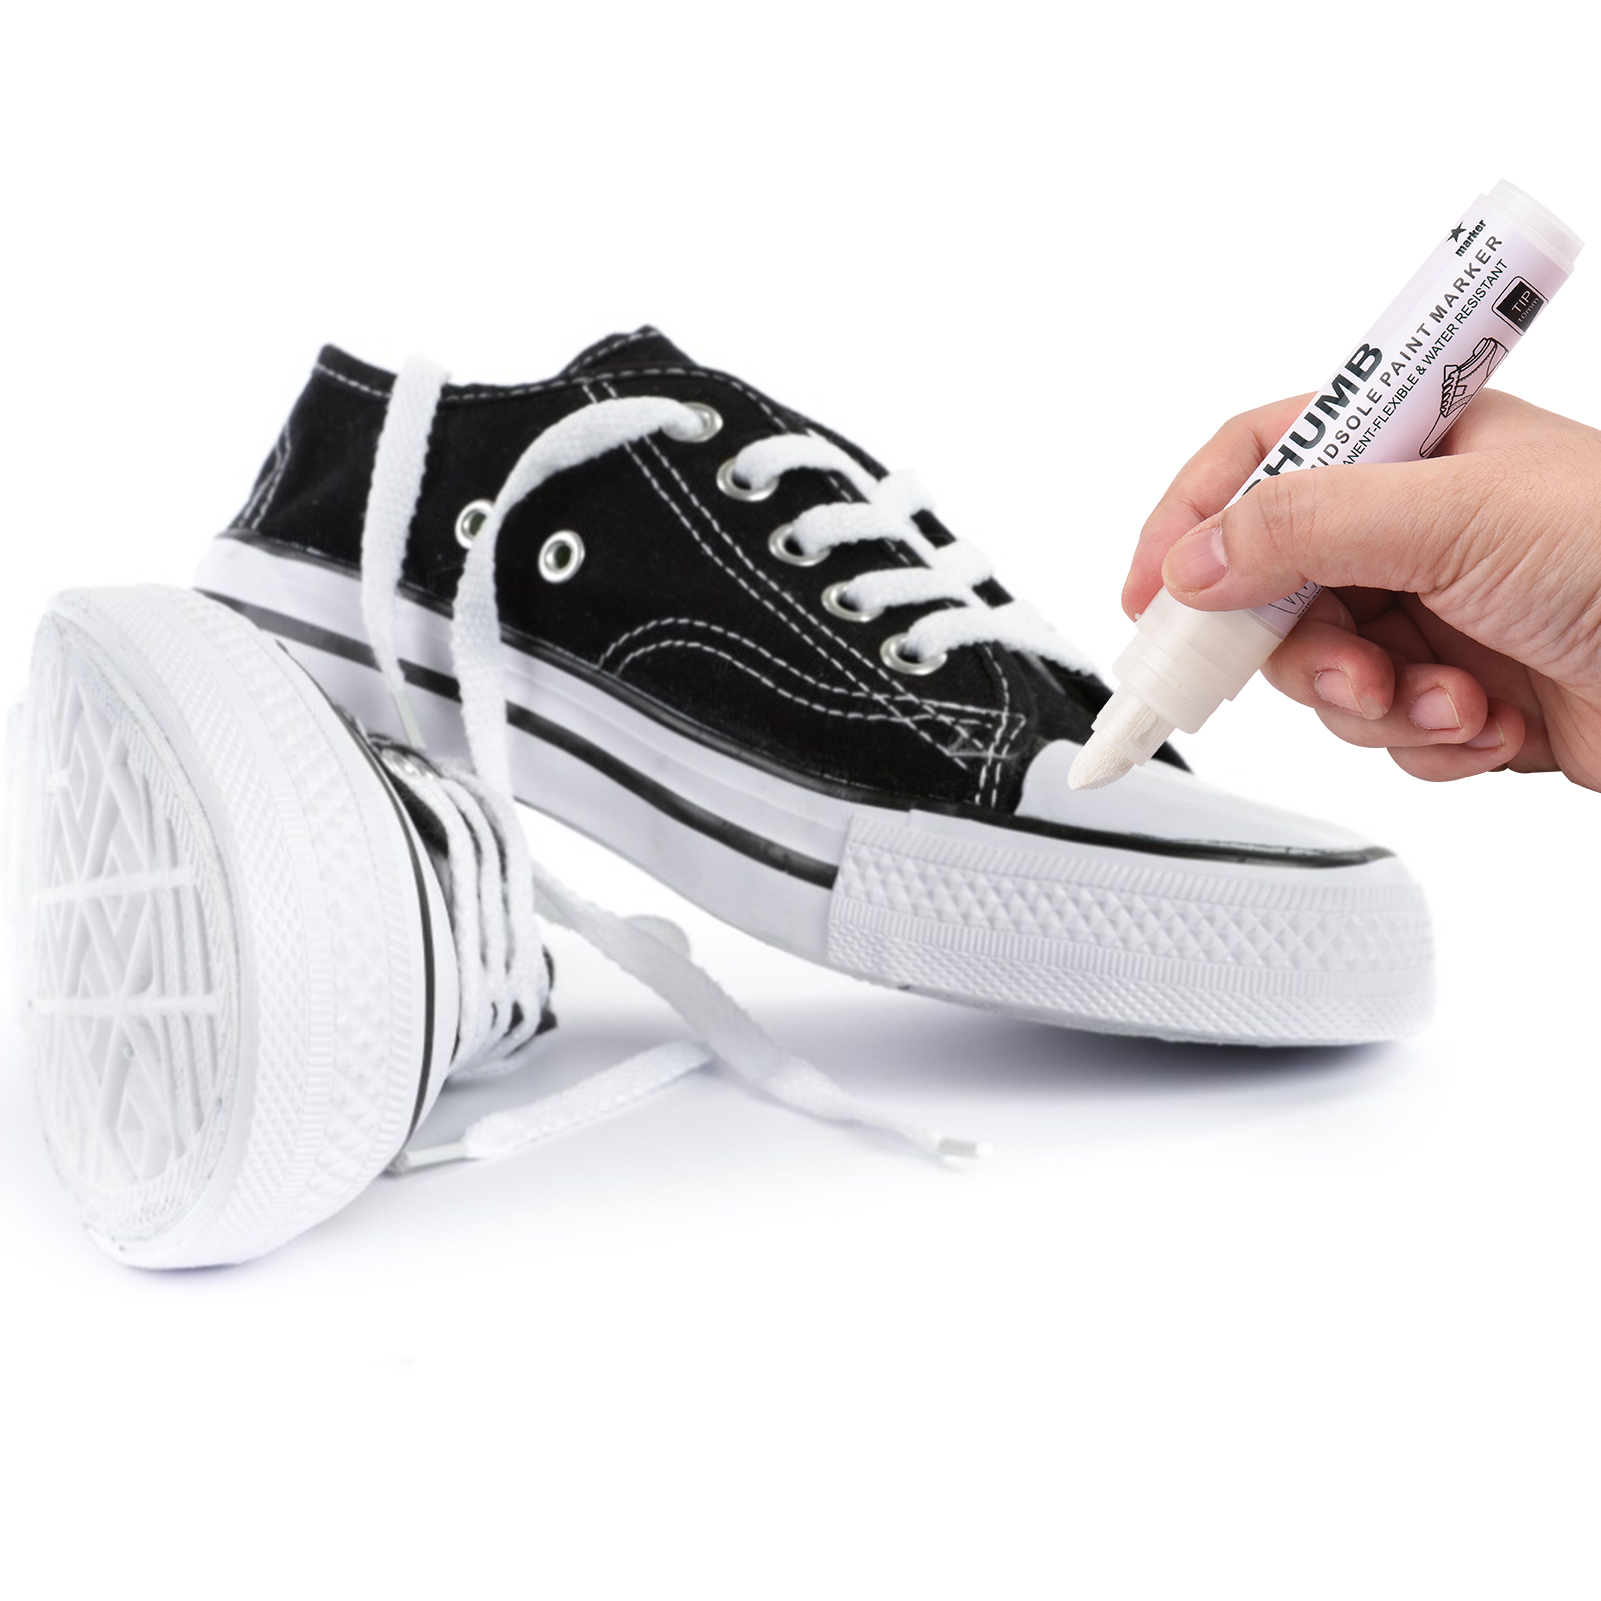 Bigthumb Midsole Paint Marker, Sneaker Repair Pen Sports Shoes Whitening Pen Quick Drying, 6mm, Size: 6mm Tip, Other